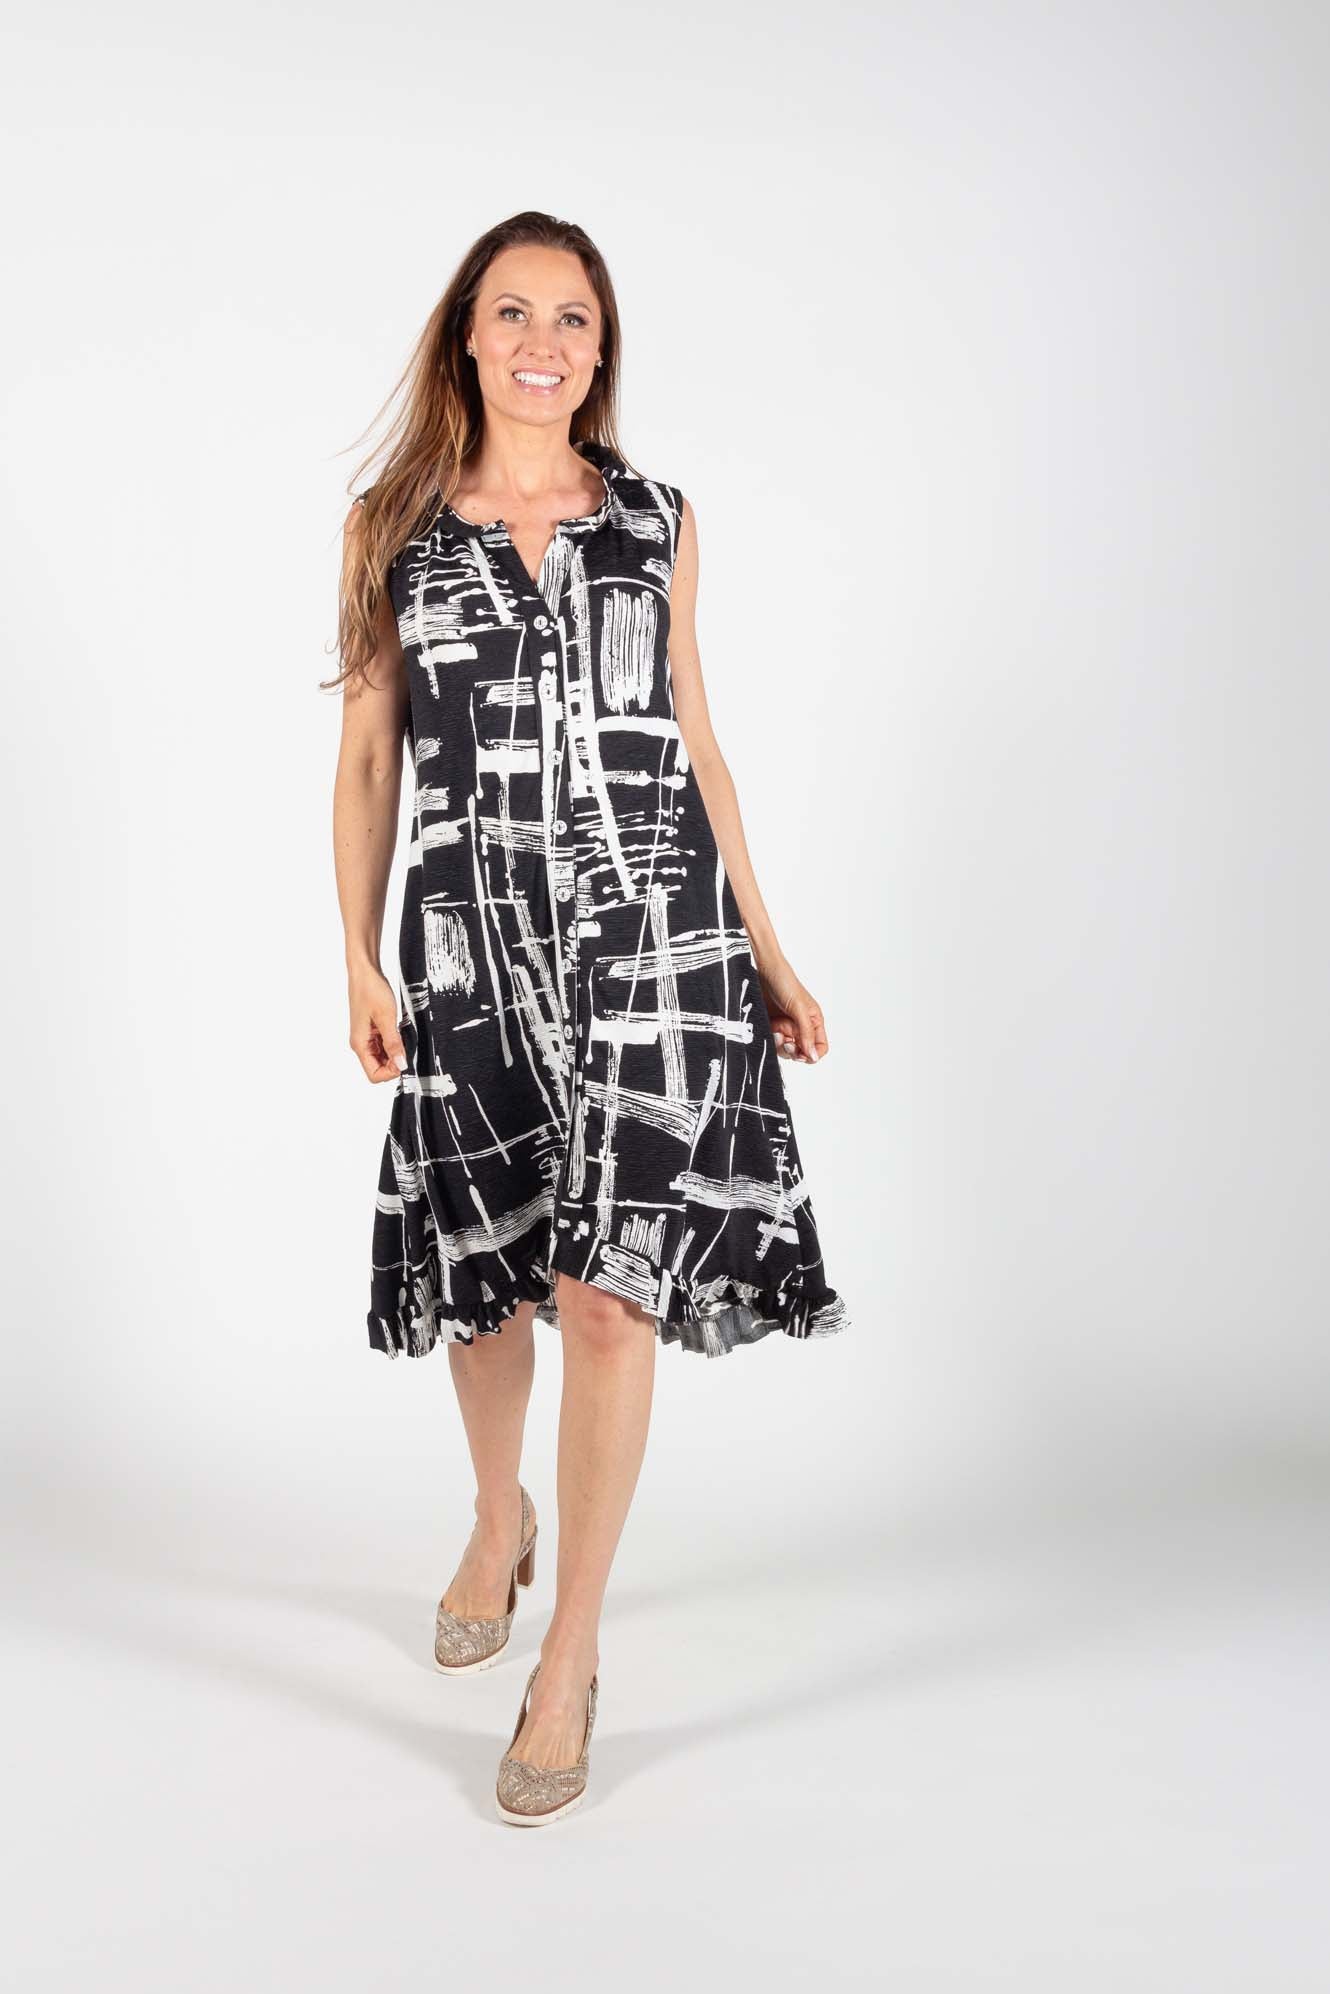 A woman wearing the Cordelia Dress by Pure Essence in Black/White Print standing in front of a white background 